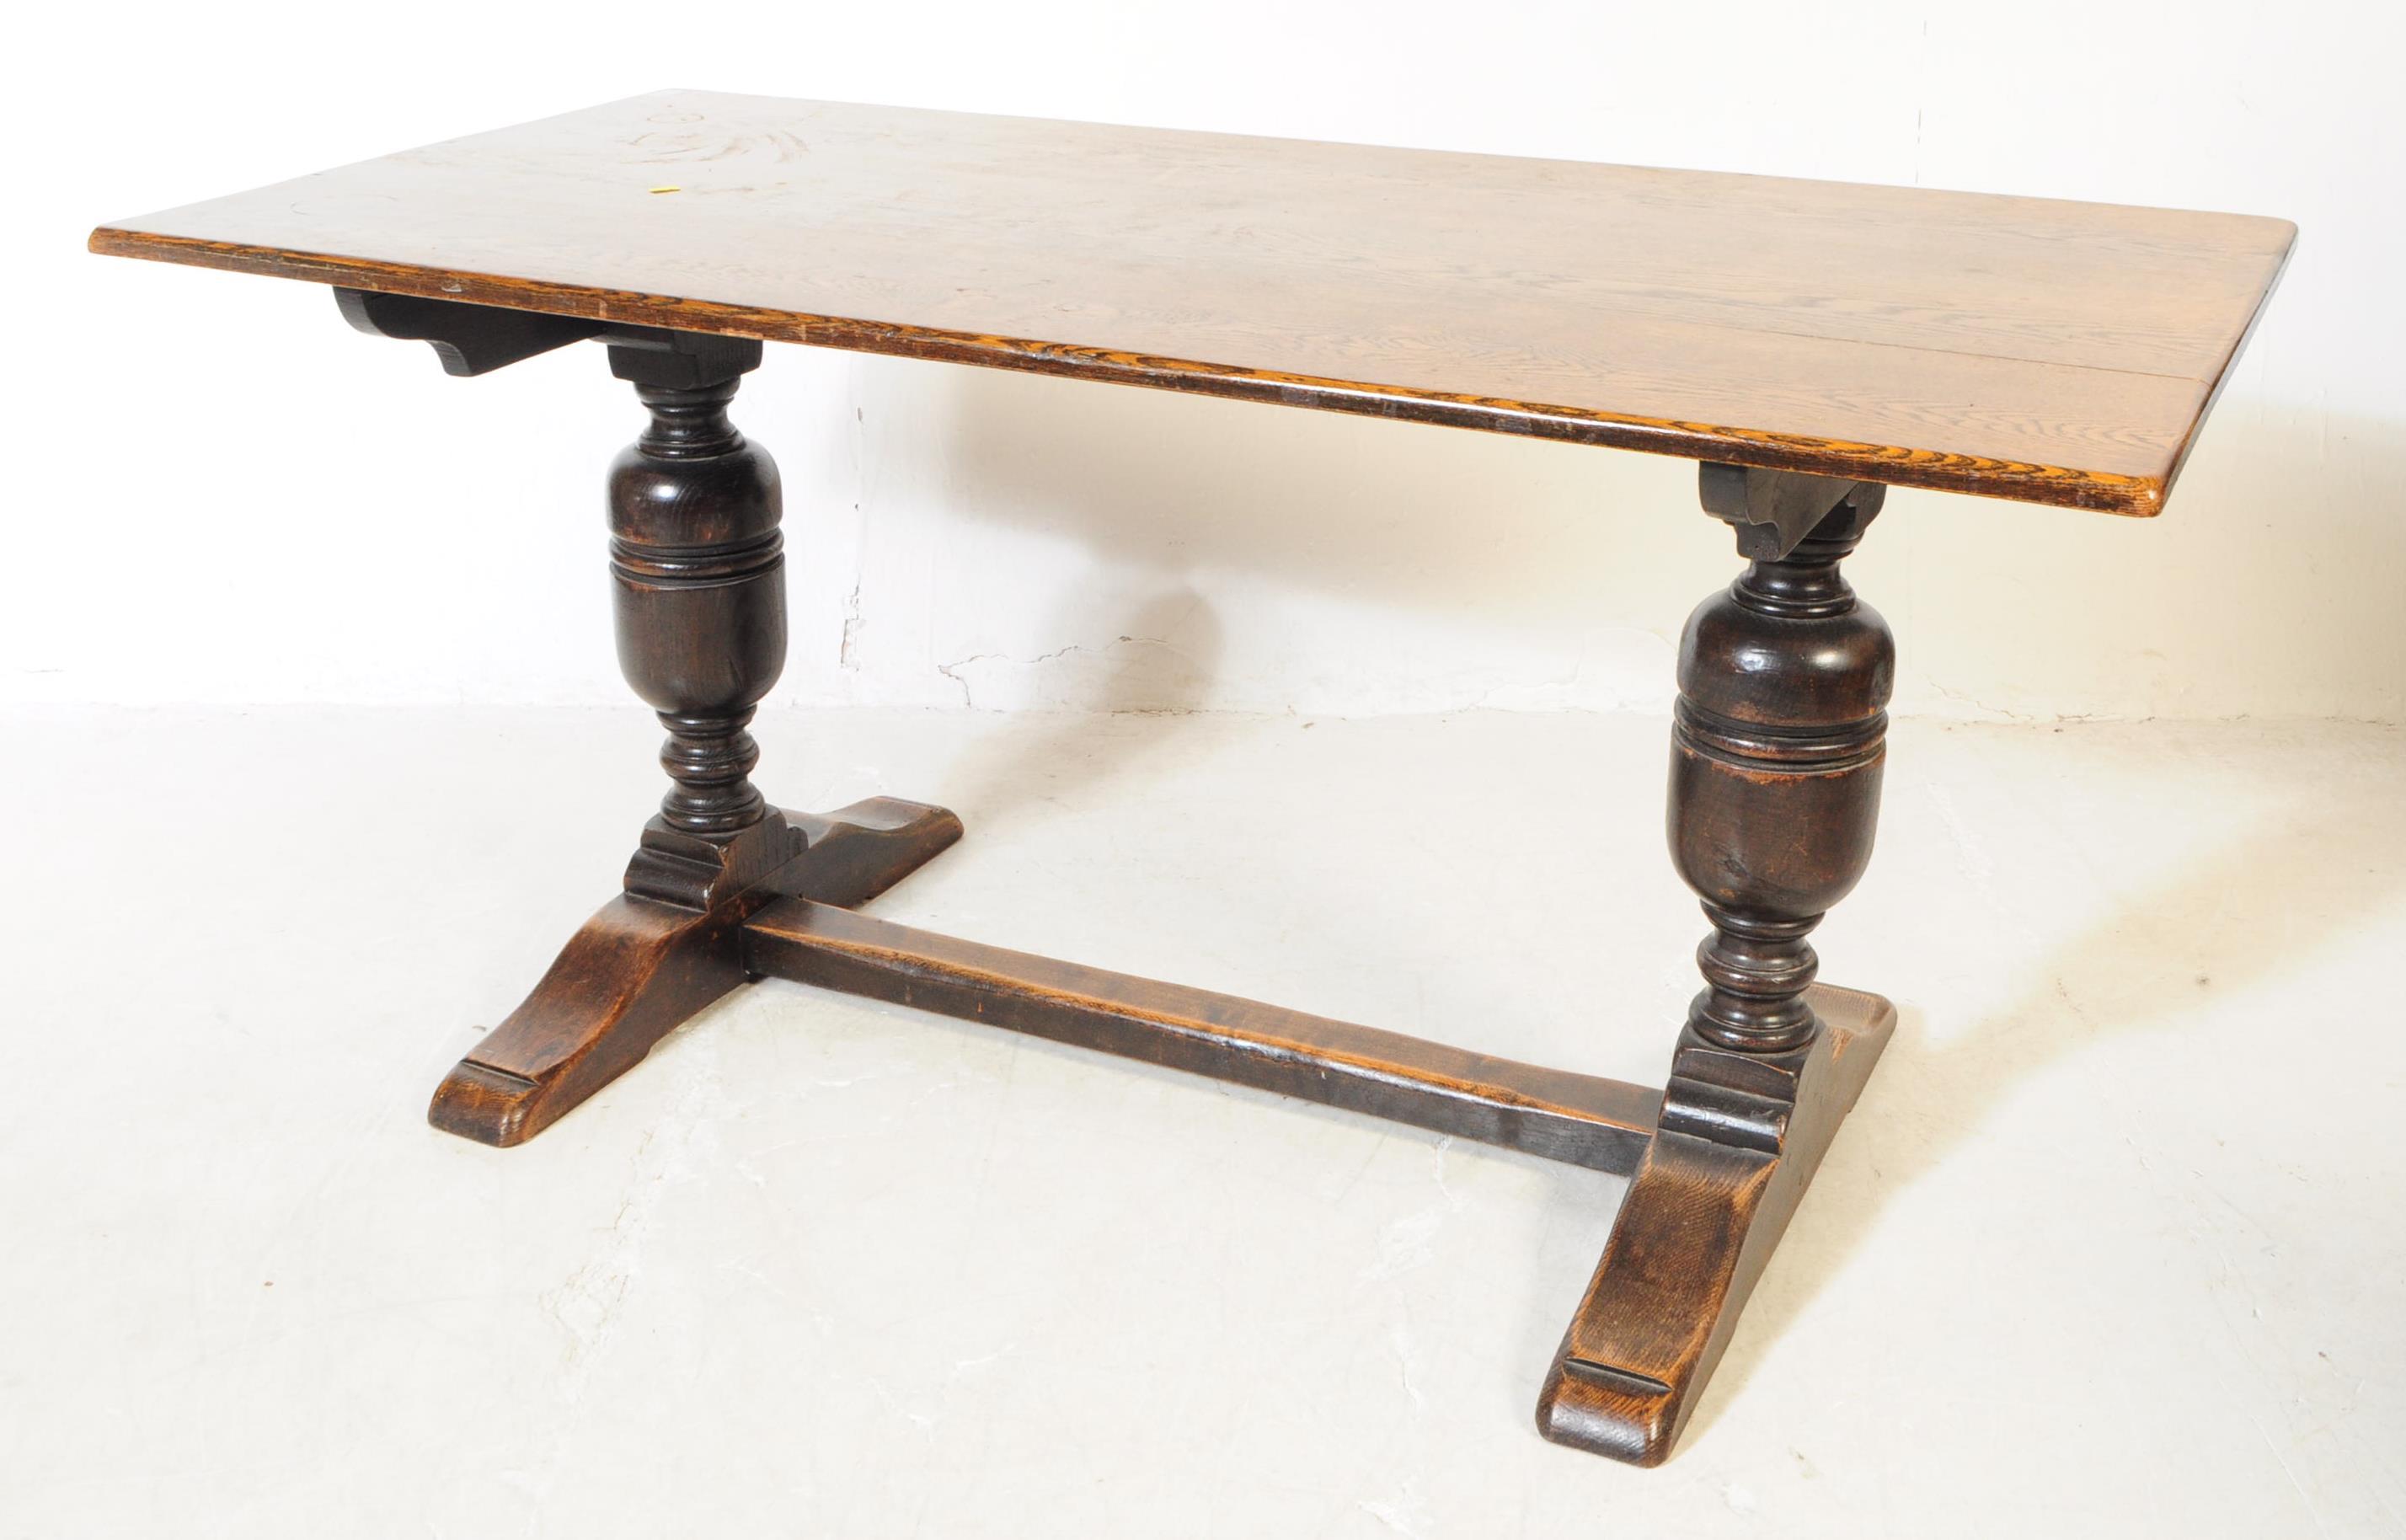 JACOBEAN REVIVAL OAK DINING TABLE & CHAIRS - Image 2 of 7